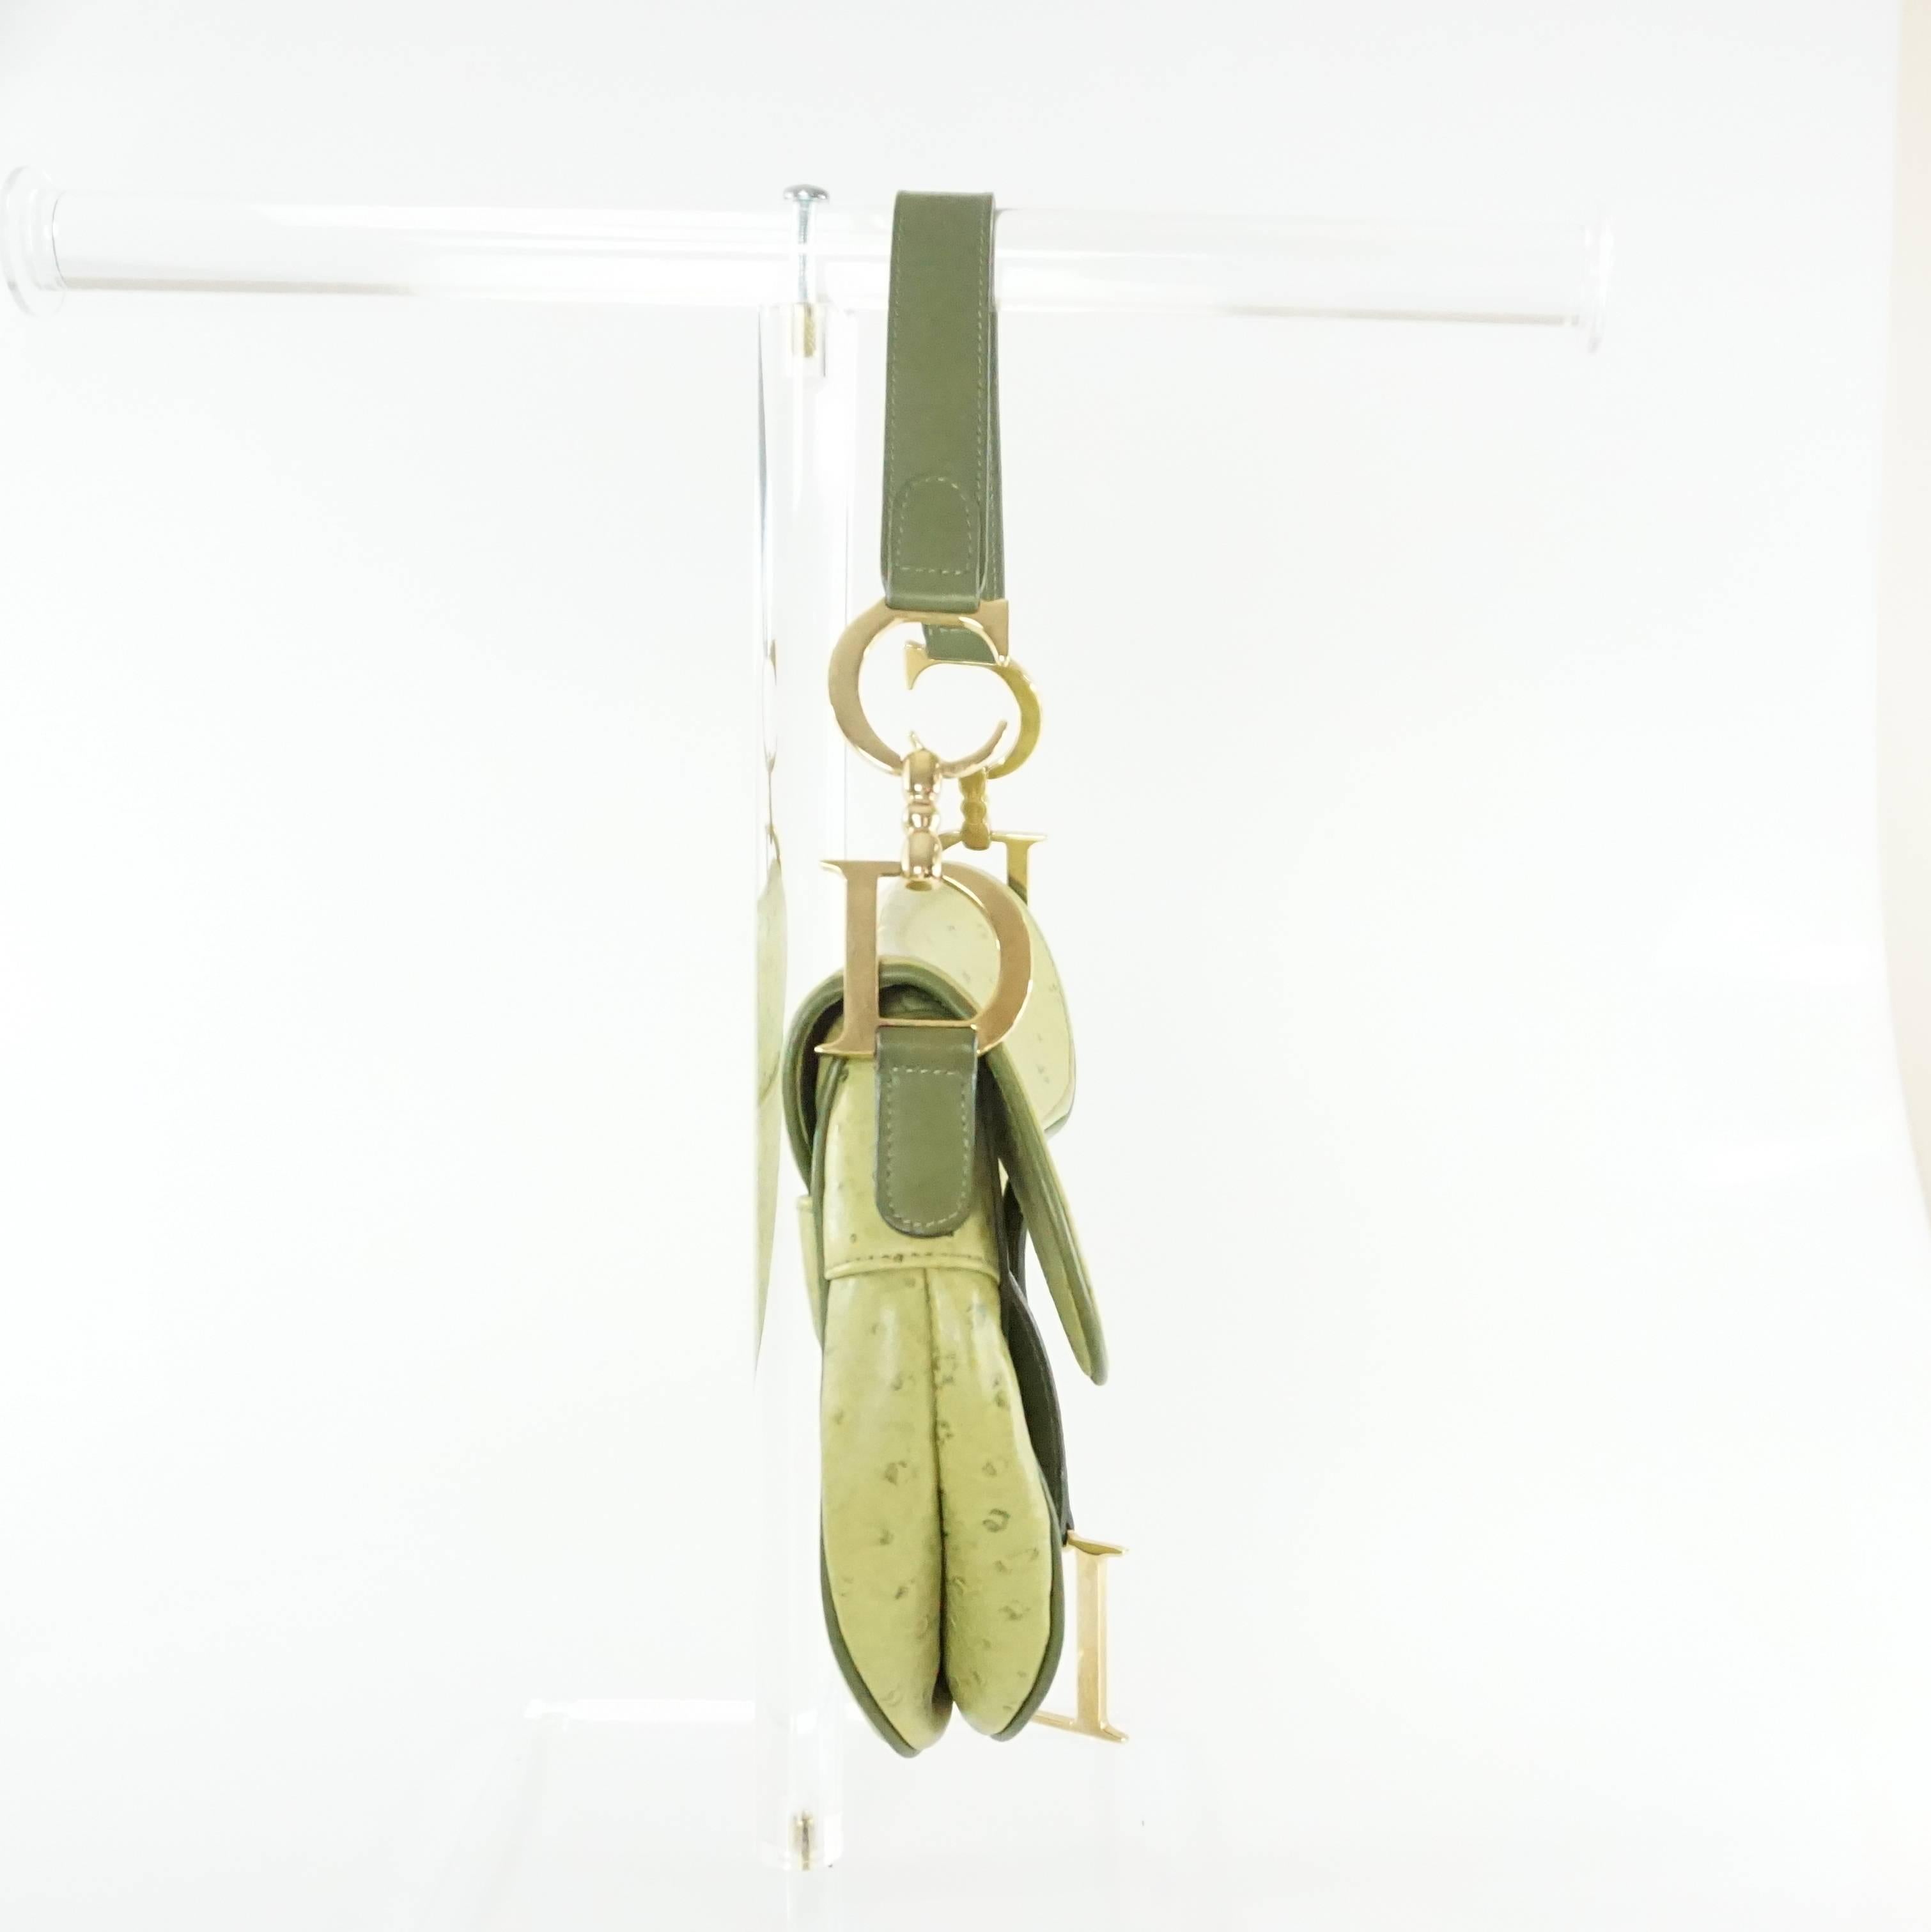 This Christian Dior green ostrich saddle bag is the perfect pop of color! It has an asymmetrical shape with gold 